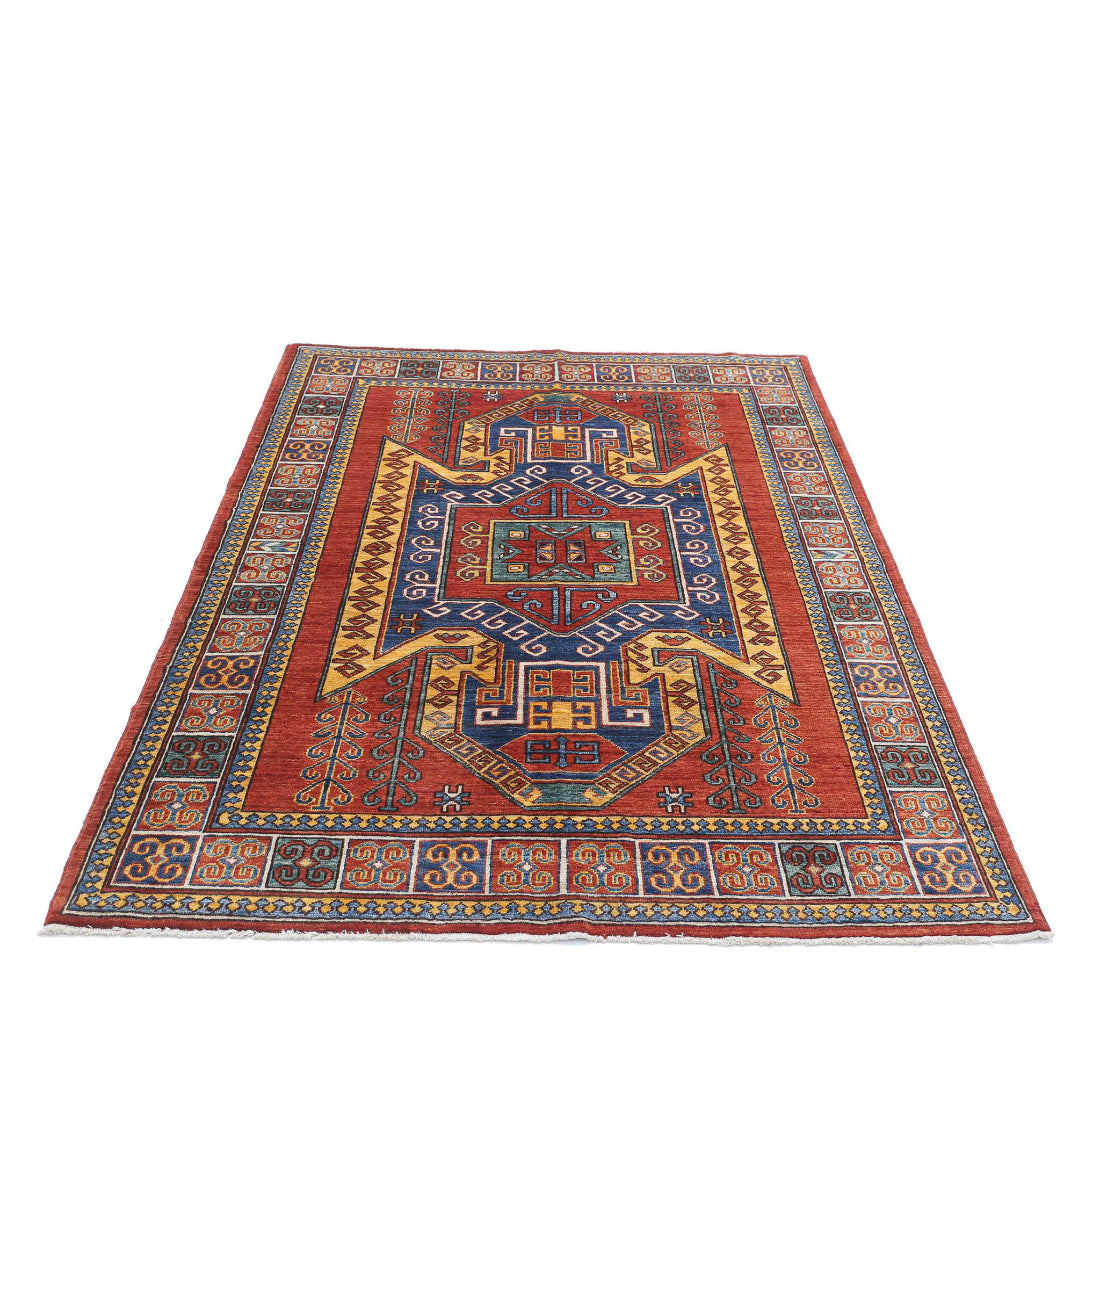 Hand Knotted Nomadic Caucasian Humna Wool Rug - 4'10'' x 6'7'' 4'10'' x 6'7'' (145 X 198) / Red / Multi